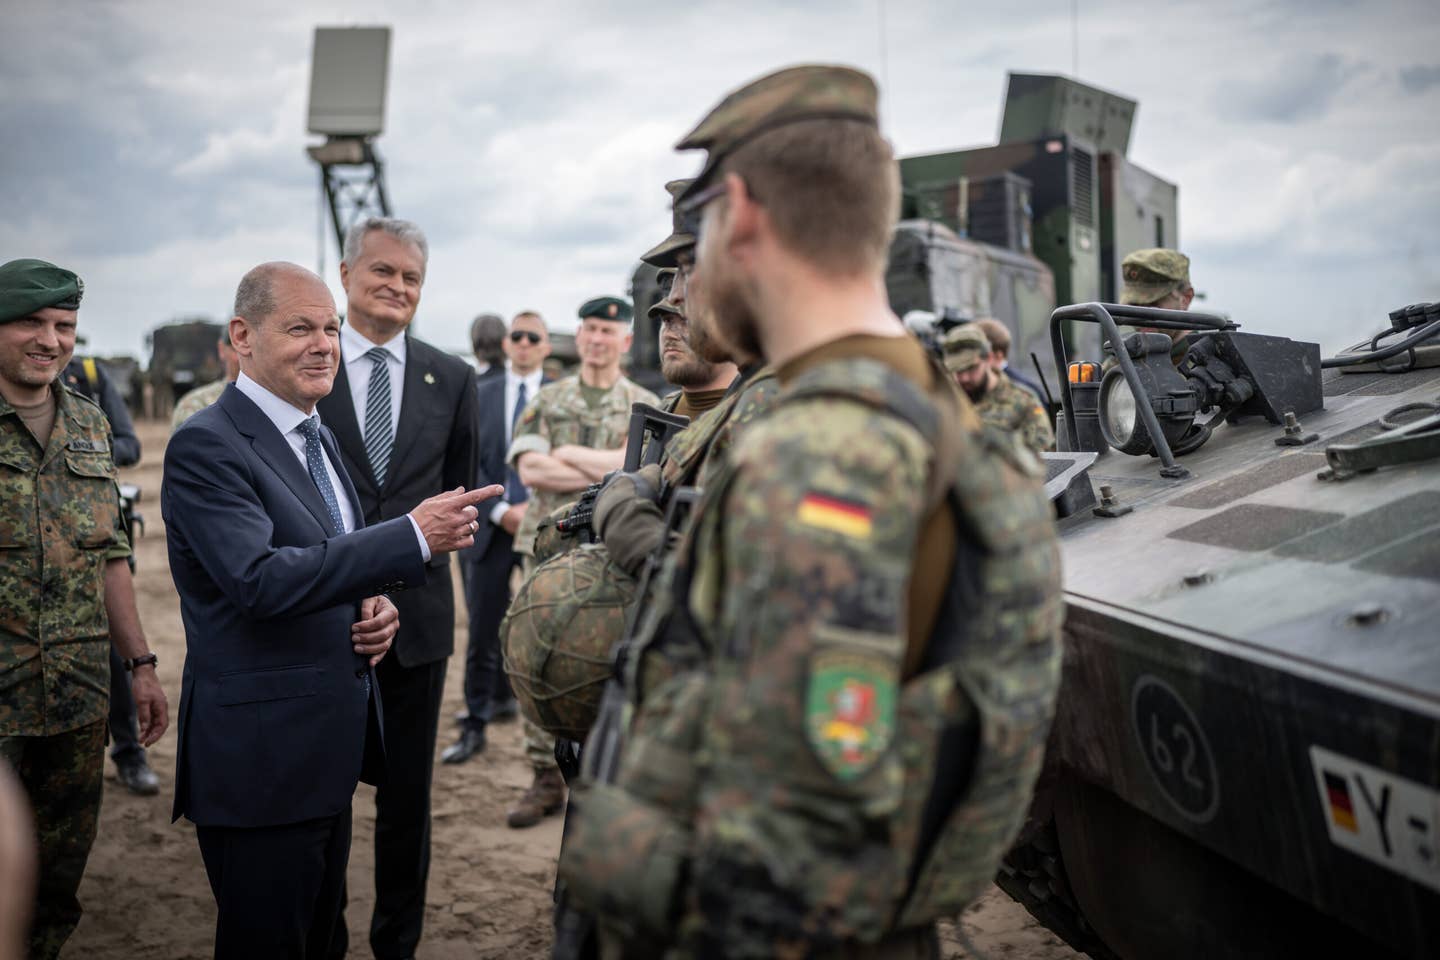 German Chancellor Olaf Scholz speaks with soldiers alongside Gitanas Nauseda, President of Lithuania (third from left), at Camp Adrian Rohn, Lithuania, where more than 1,000 German soldiers are currently stationed as part of the NATO Enhanced Forward Presence Battle Group. <em>Photo by Michael Kappeler/picture alliance via Getty Images</em>